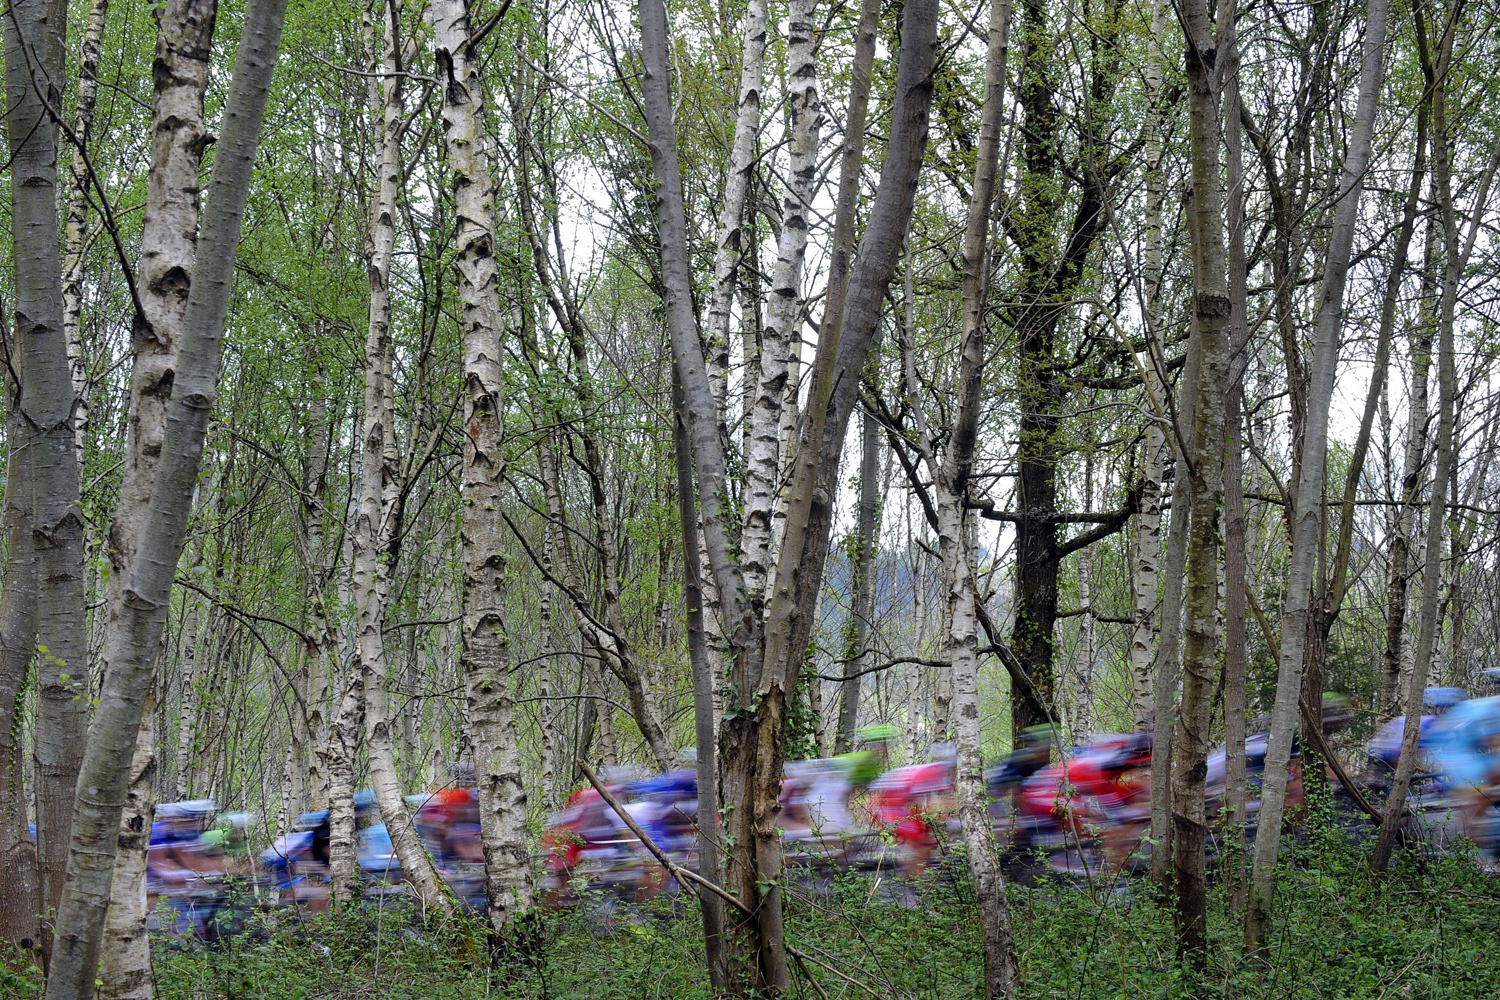 Apr. 7, 2014. The pack climb the Okorro hill in Lazkao during the first stage of the Tour of the Basque Country, a 153.4km ride around Ordizia, northern Spain. Former two-time Tour de France champion Alberto Contador (Tinkoff-Saxo) won the first stage of the Tour of the Basque Country.